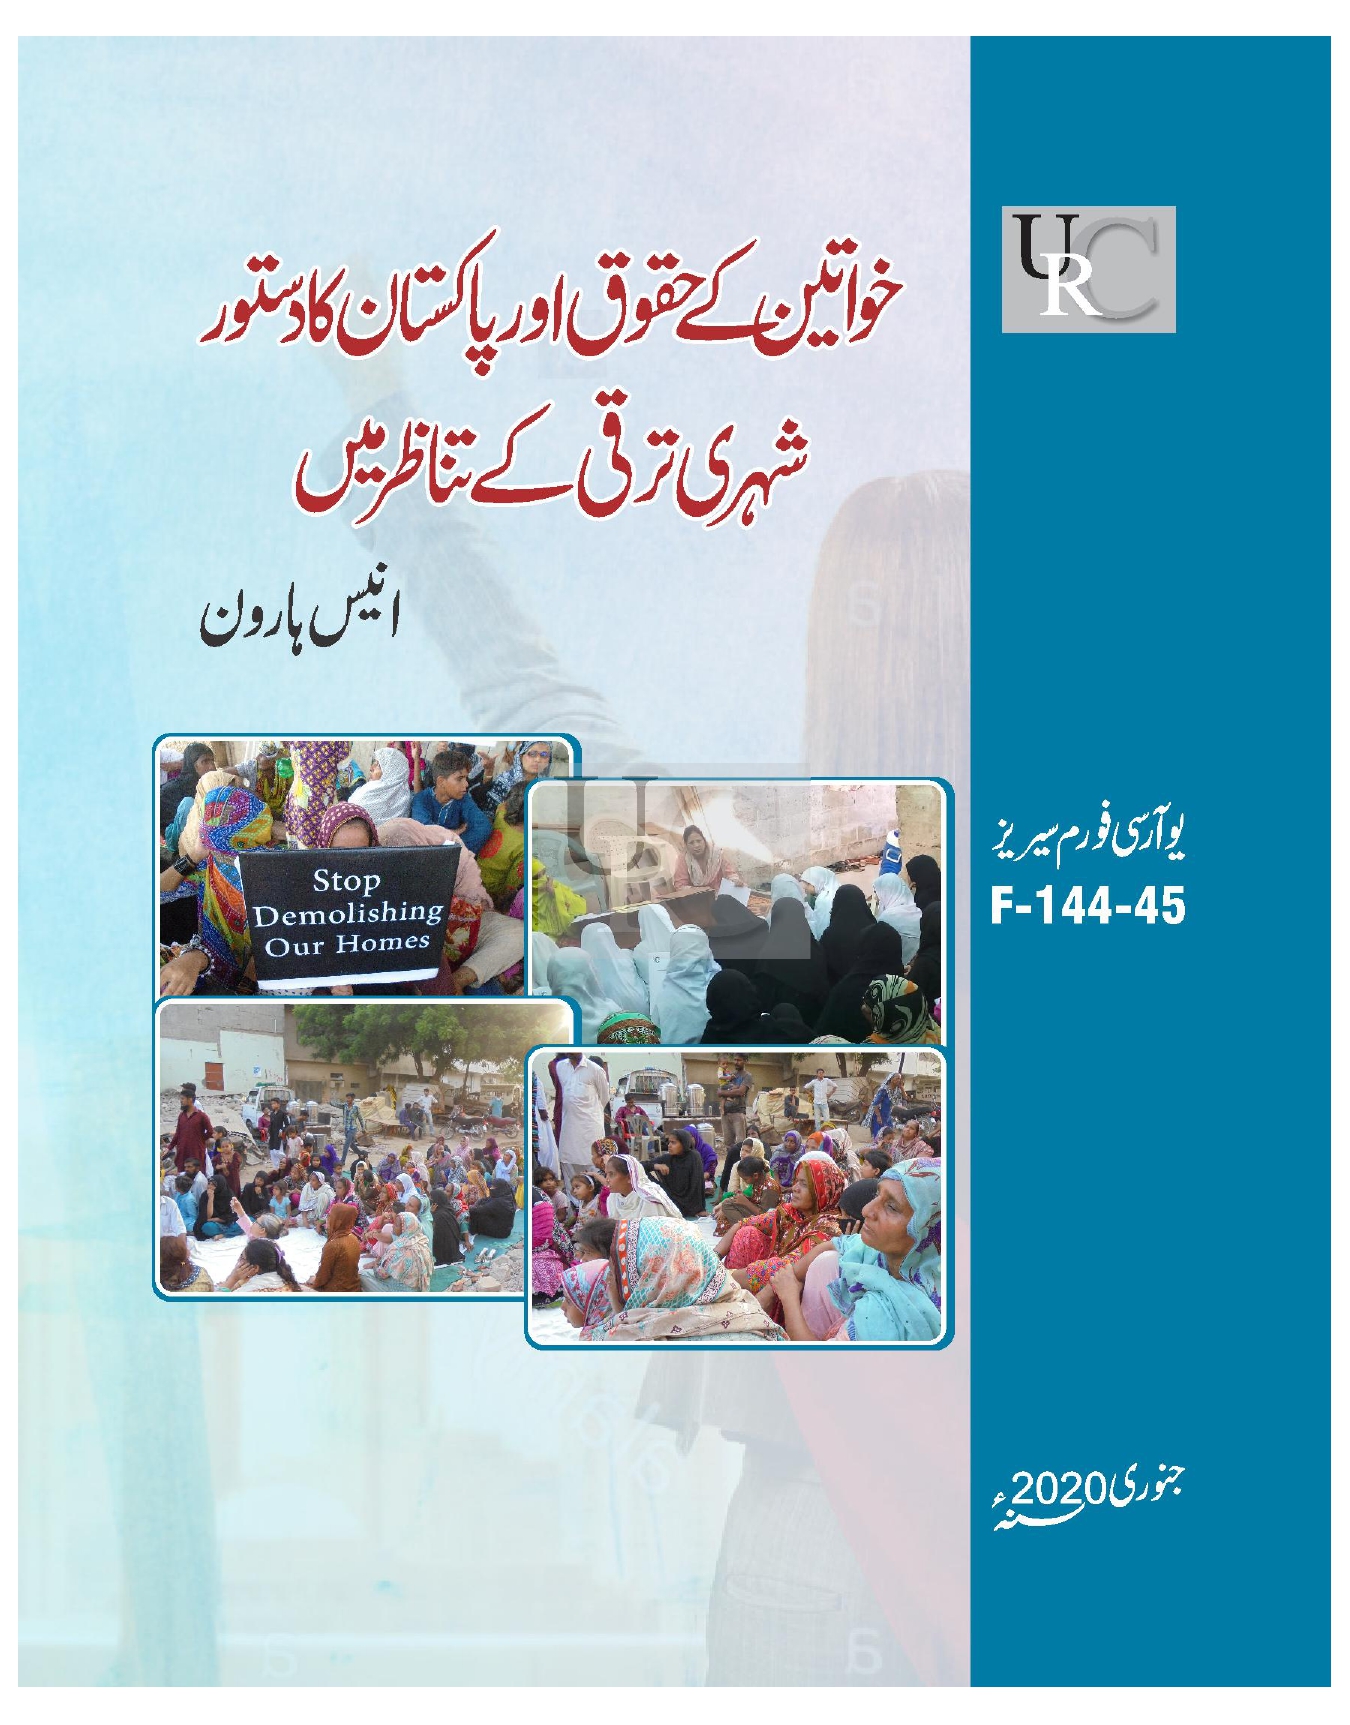 Women’s rights and the law of Pakistan in urban development Forum by Anees Haroon 30 October 2019